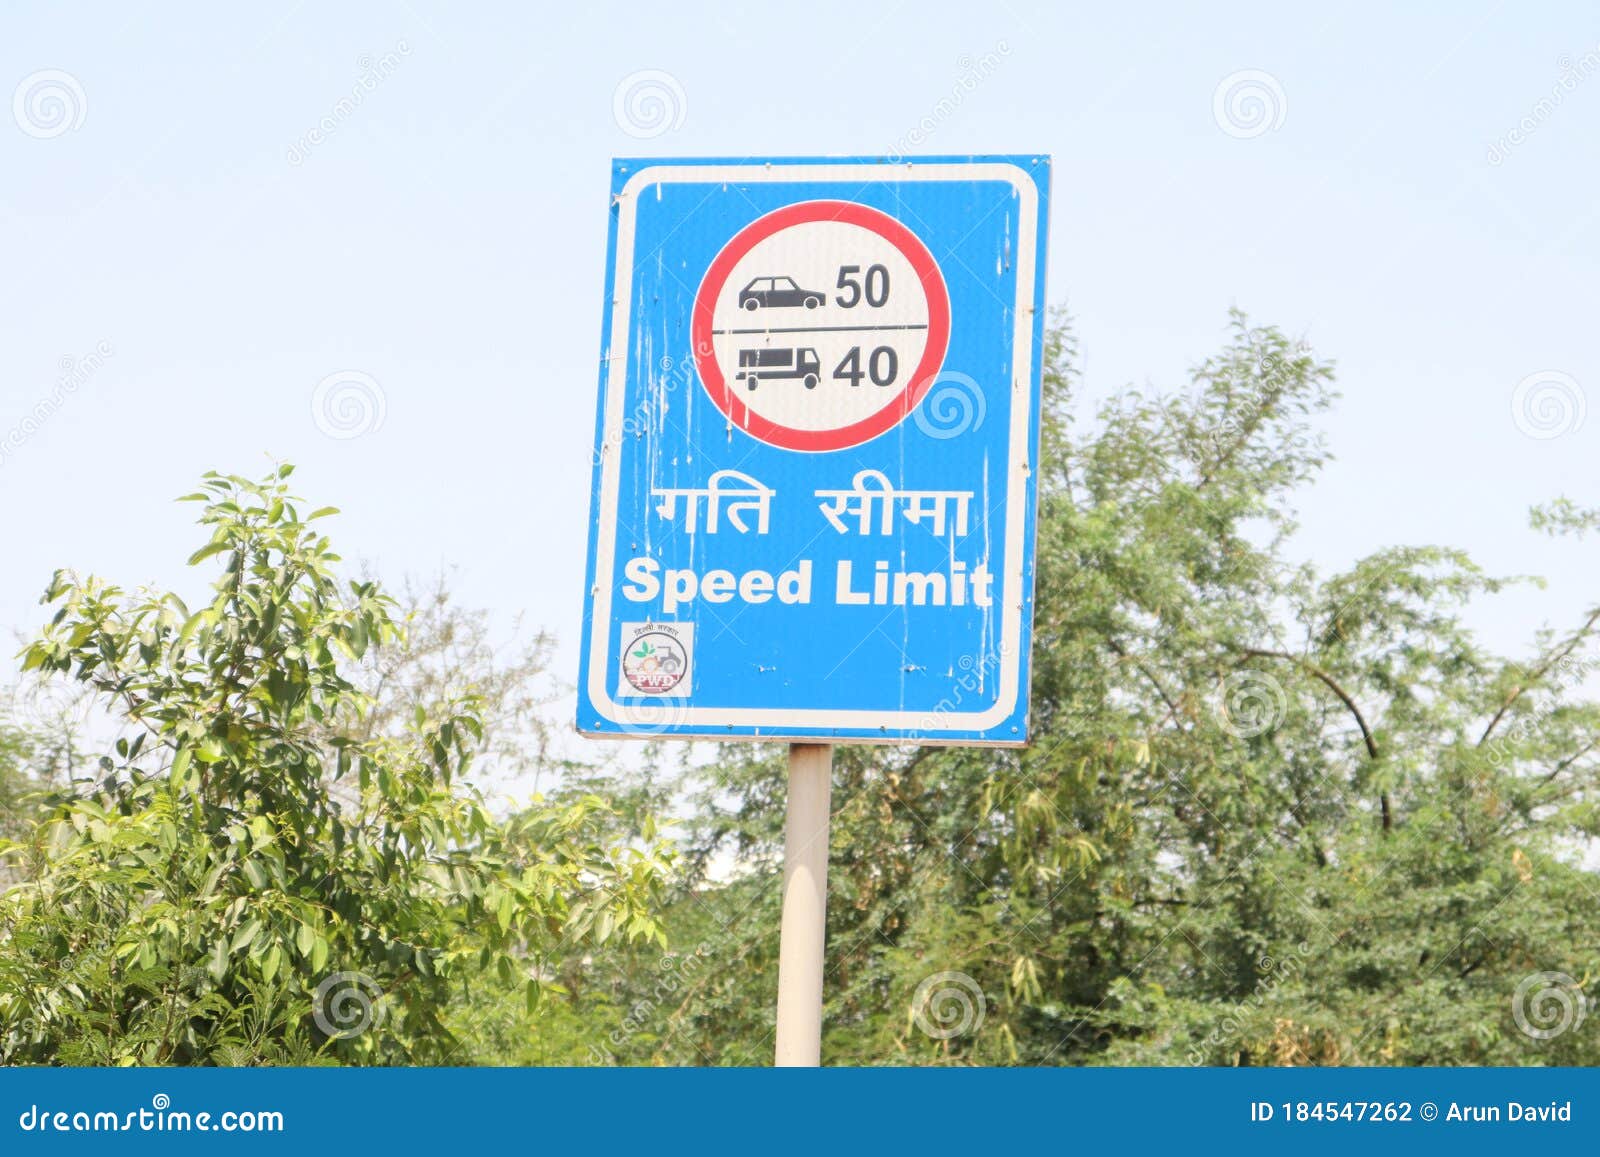 new-delhi-india-27-05-2020-speed-limit-street-boards-signs-texture